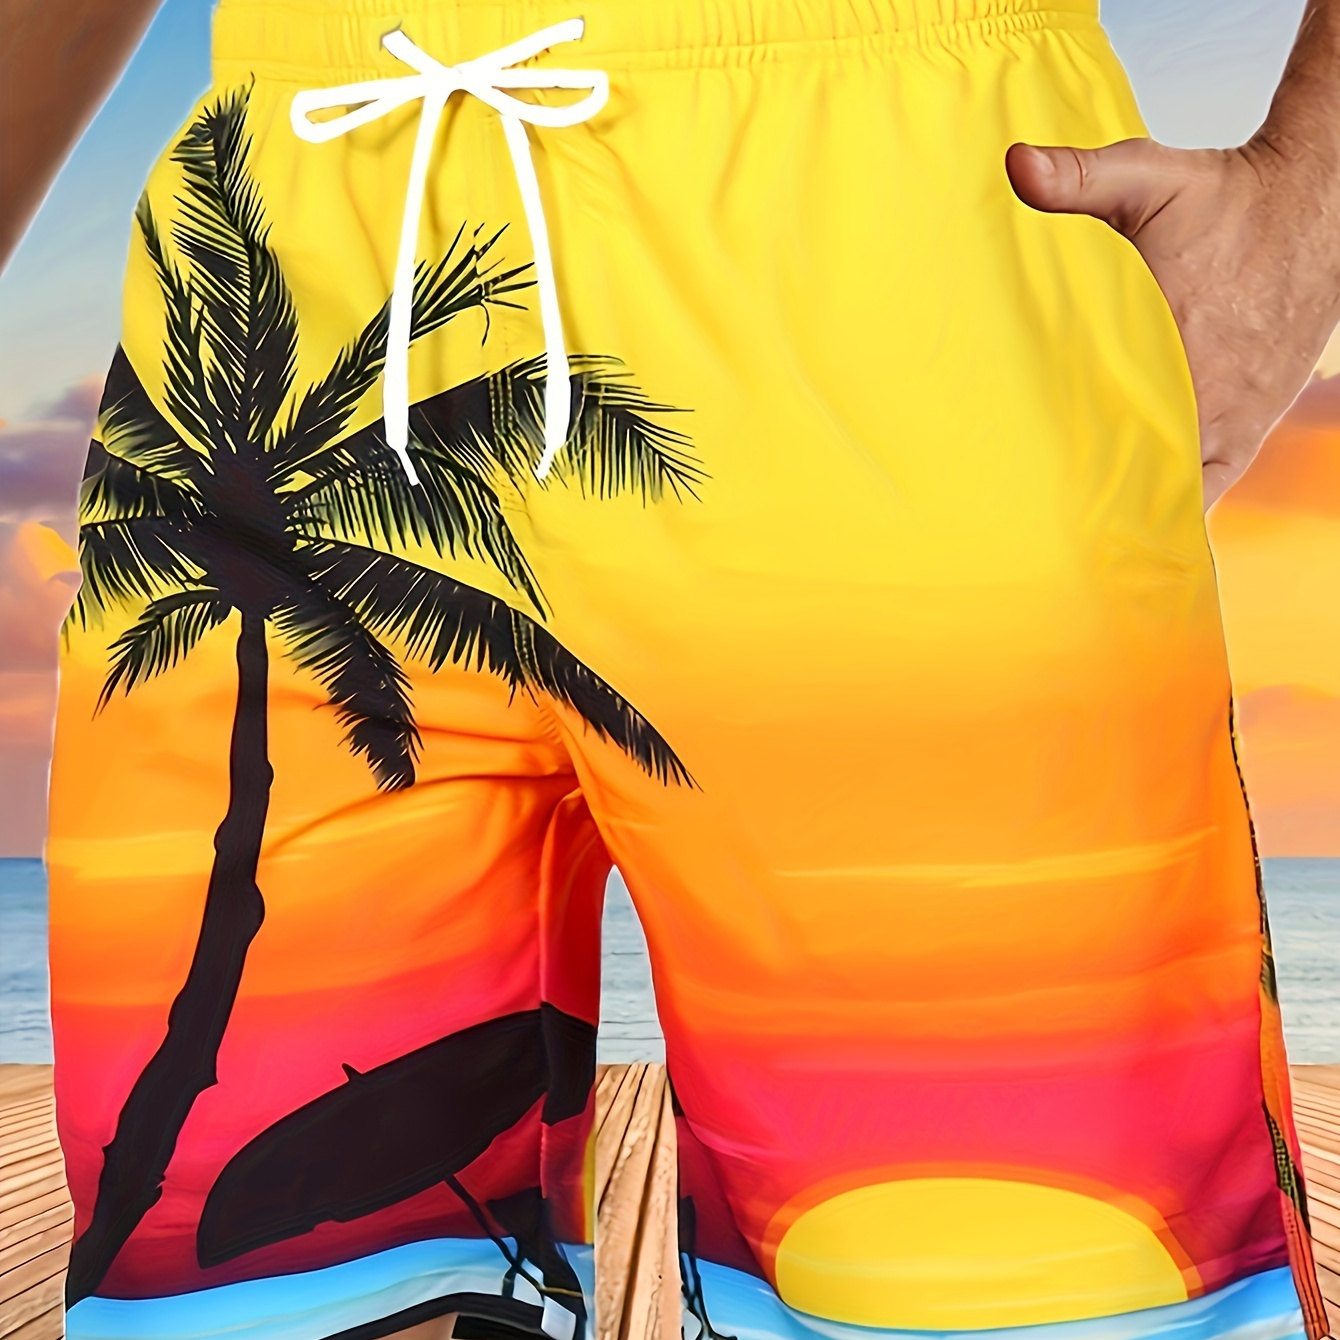 

Men's Beach Theme Sunset And Coconut Tree Pattern Shorts With Drawstring And Pockets, Trendy And Chic Shorts For Summer Beach And Holiday Wear